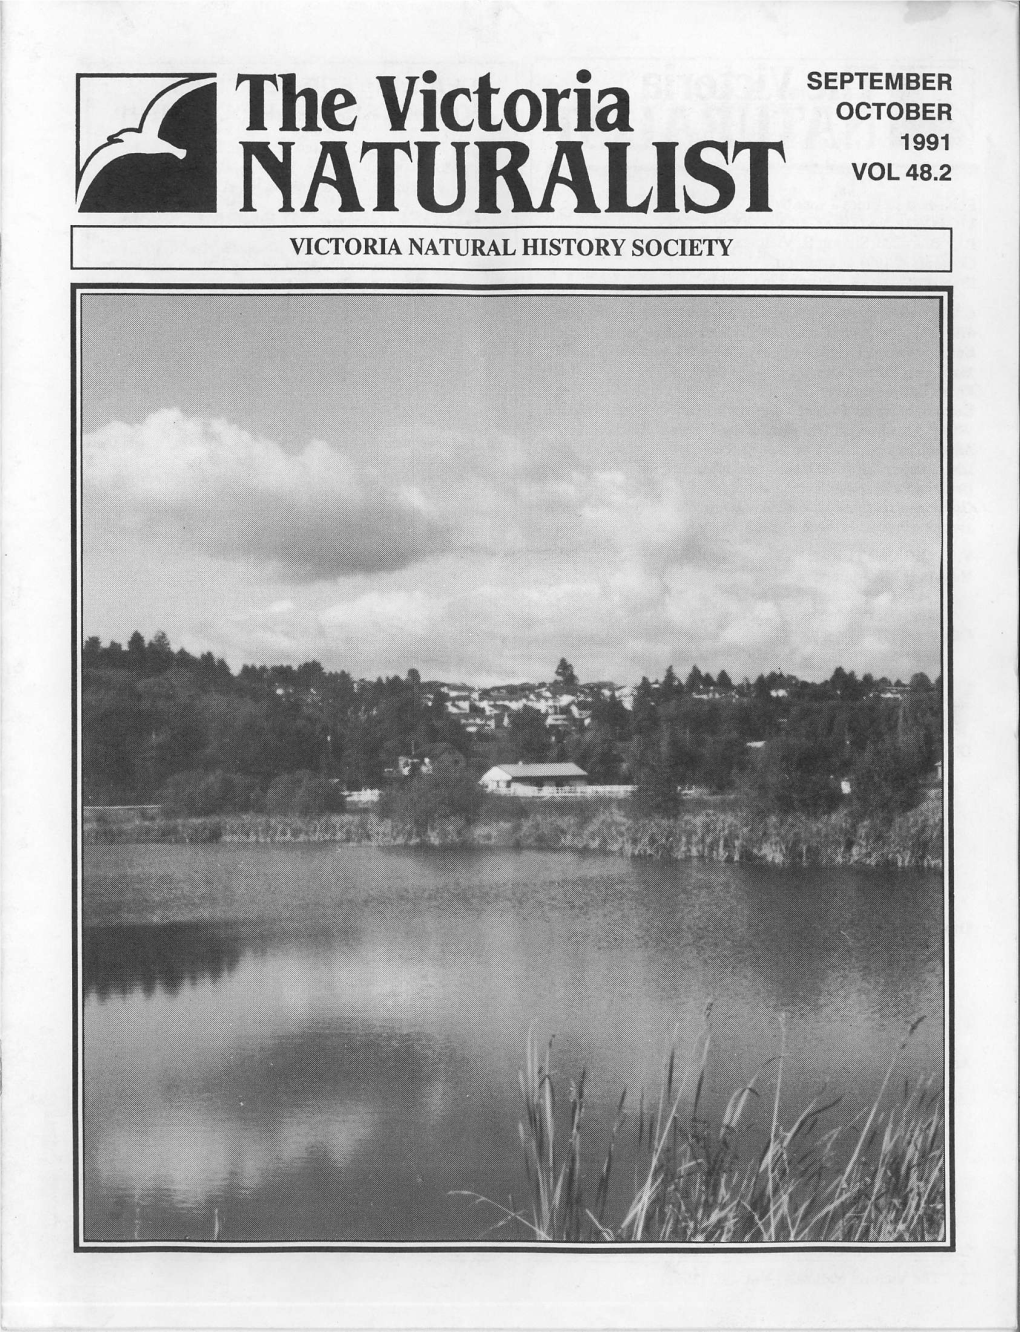 NATURALIST VOL 48.2 VICTORIA NATURAL HISTORY SOCIETY the Victoria DEADLINE for SUBMISSIONS Our Cover for NEXT ISSUE: Sept